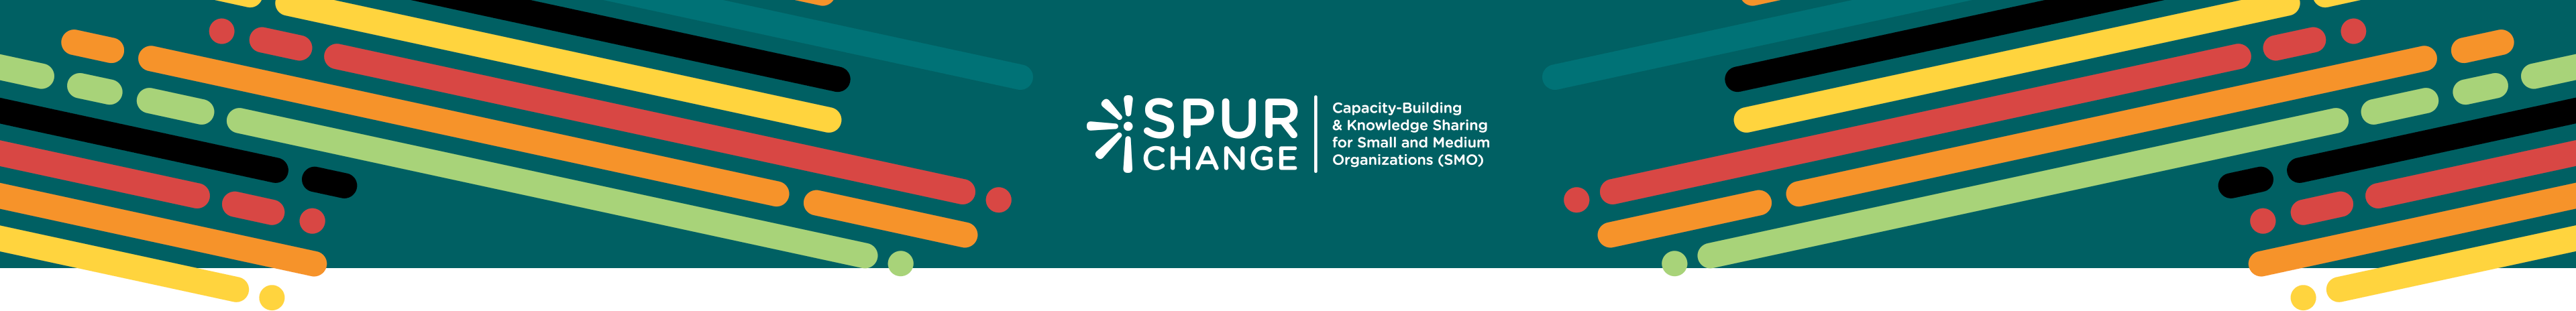 Spur Change - Capacity Building & Knowledge Sharing for Small and Medium Organizations (SMO)